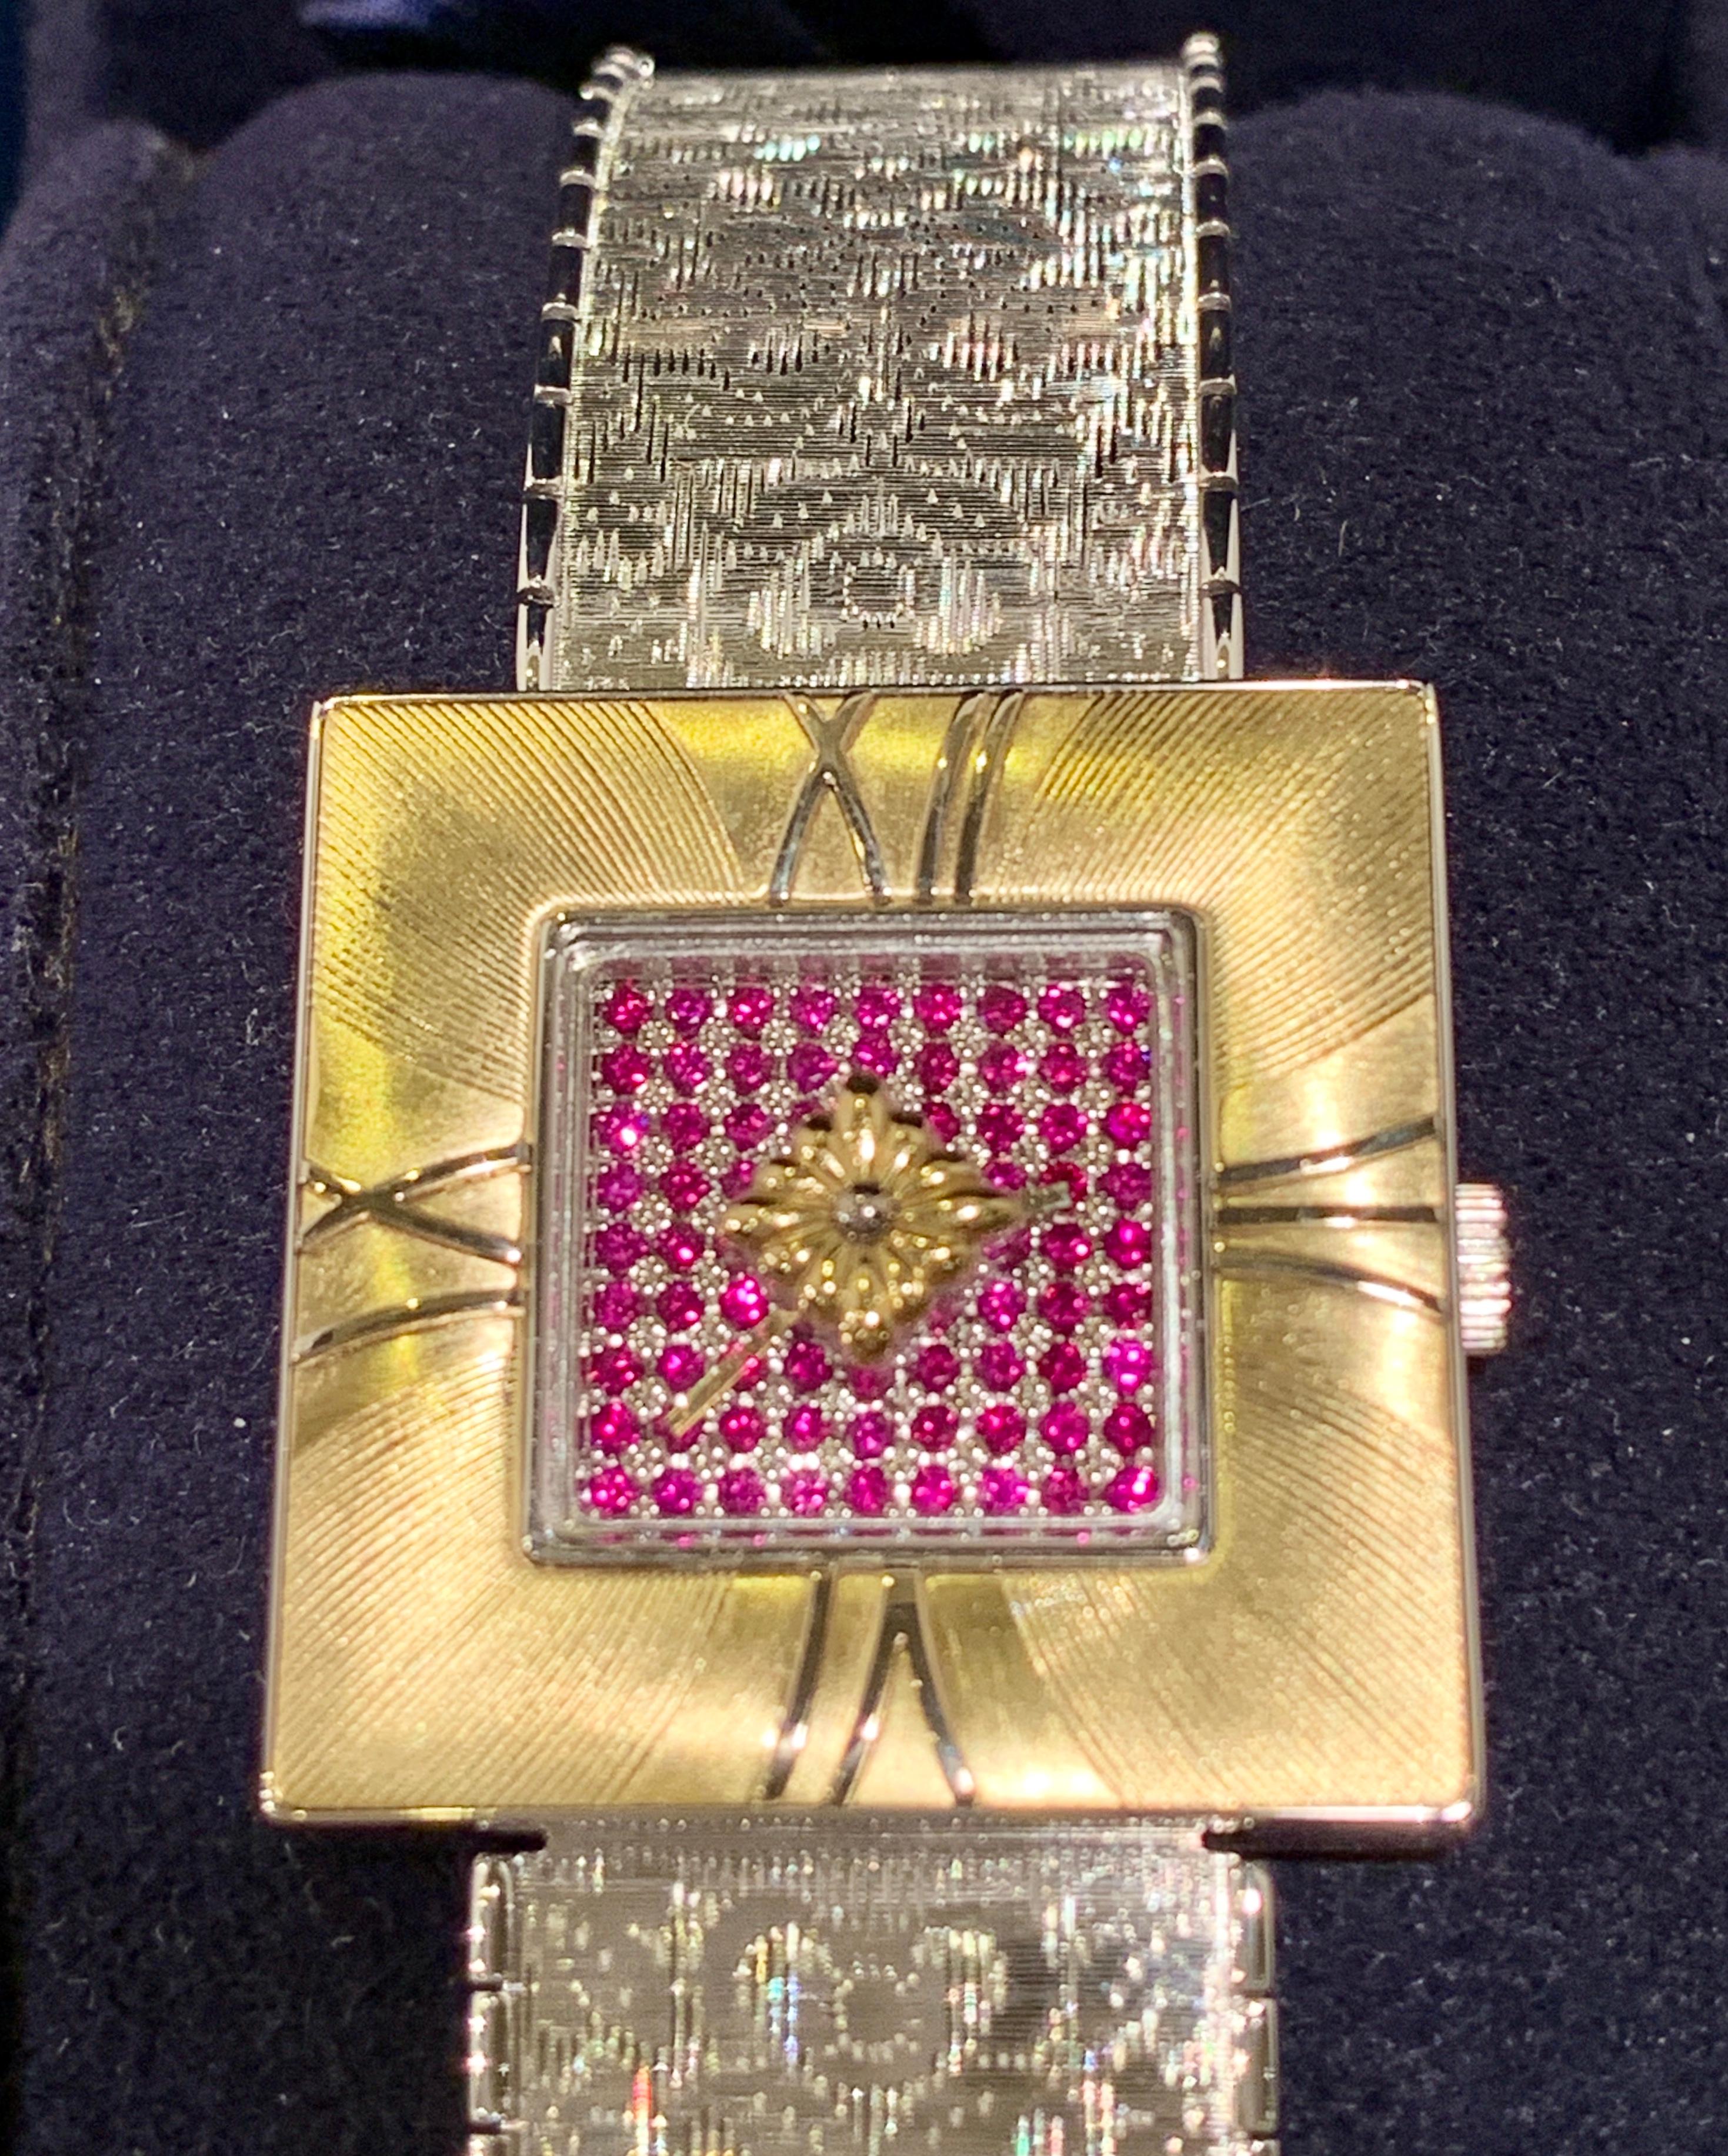 Exquisite, Italian-made Gianmaria Buccellati Milano Dal 1919 Agalma Damasco Agalmachron 2-tone 18 karat gold ladies watch with a ruby face, an engraved white gold bracelet and a hidden deployment clasp, yellow gold square case with 4 Roman numerals,